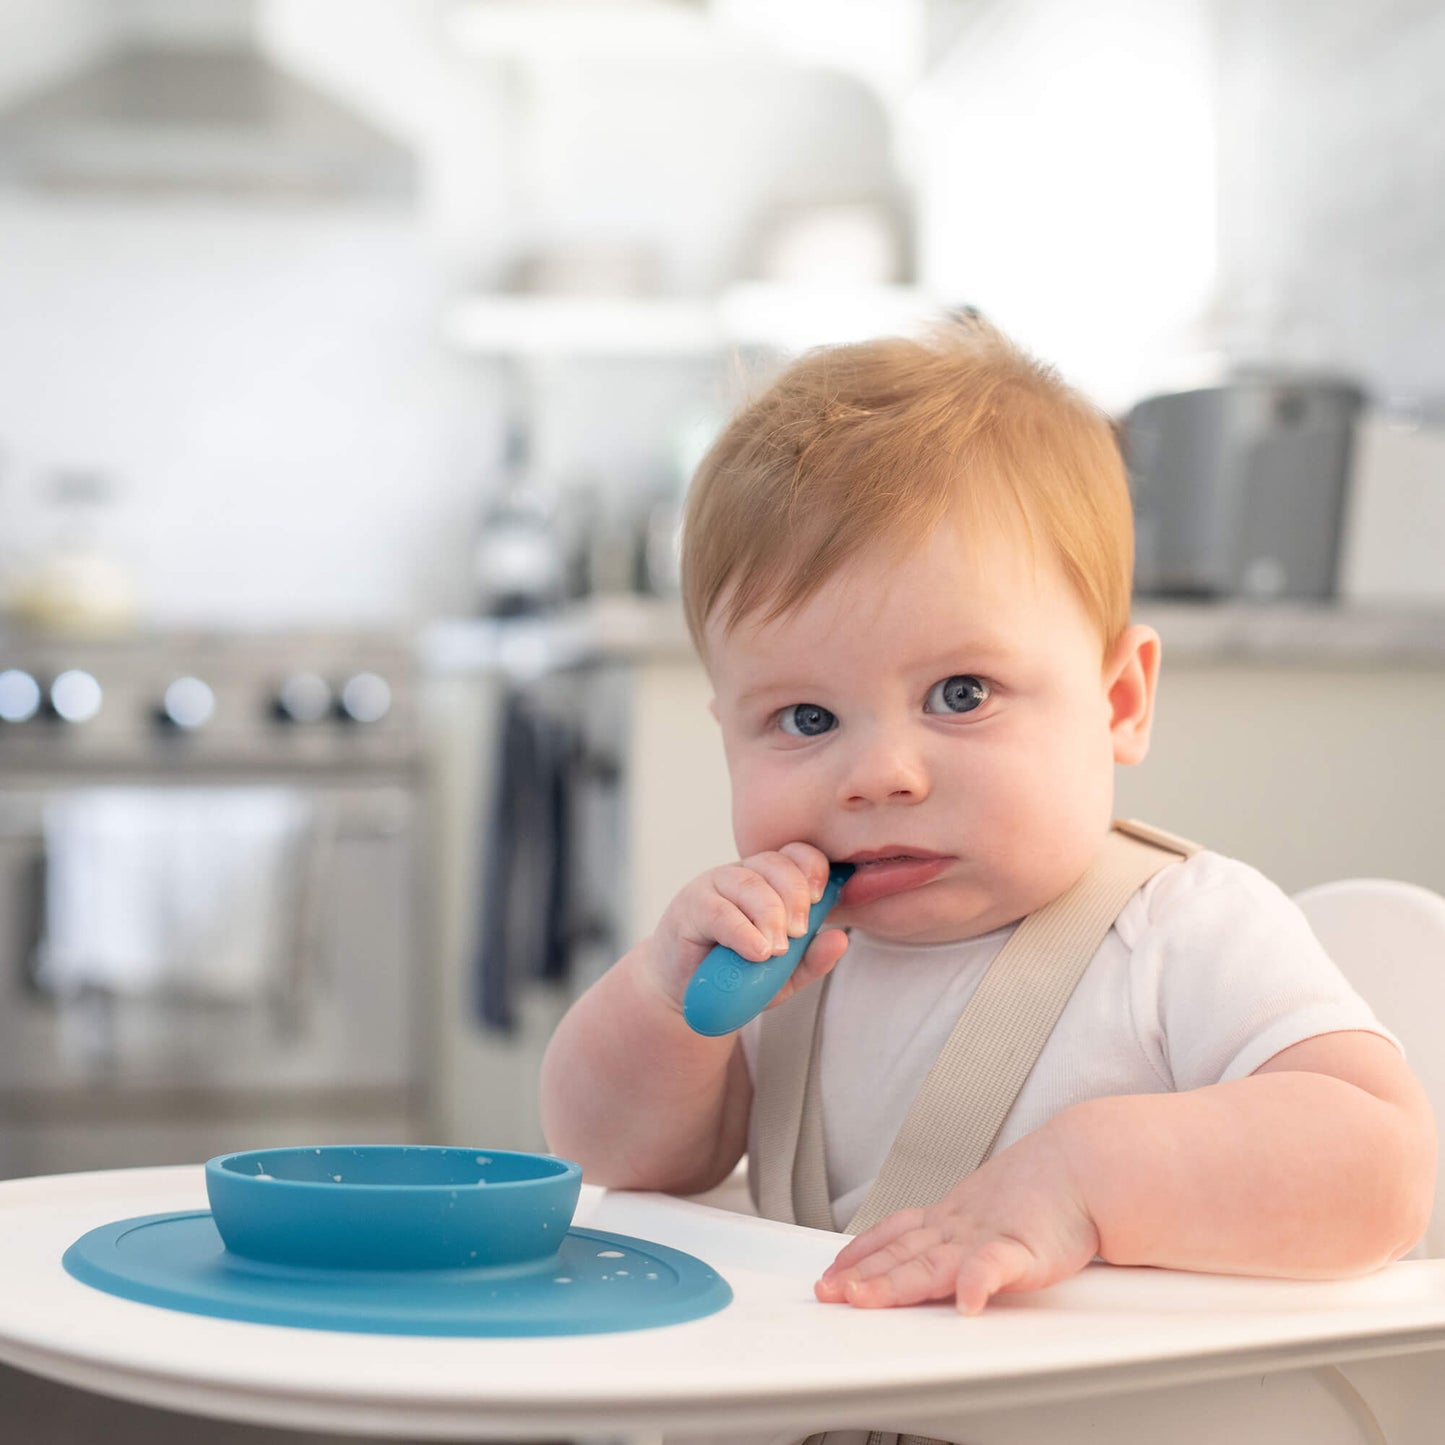 The Tiny Bowl in Blue by ezpz / Silicone Bowl for Babies that Fits on High Chairs